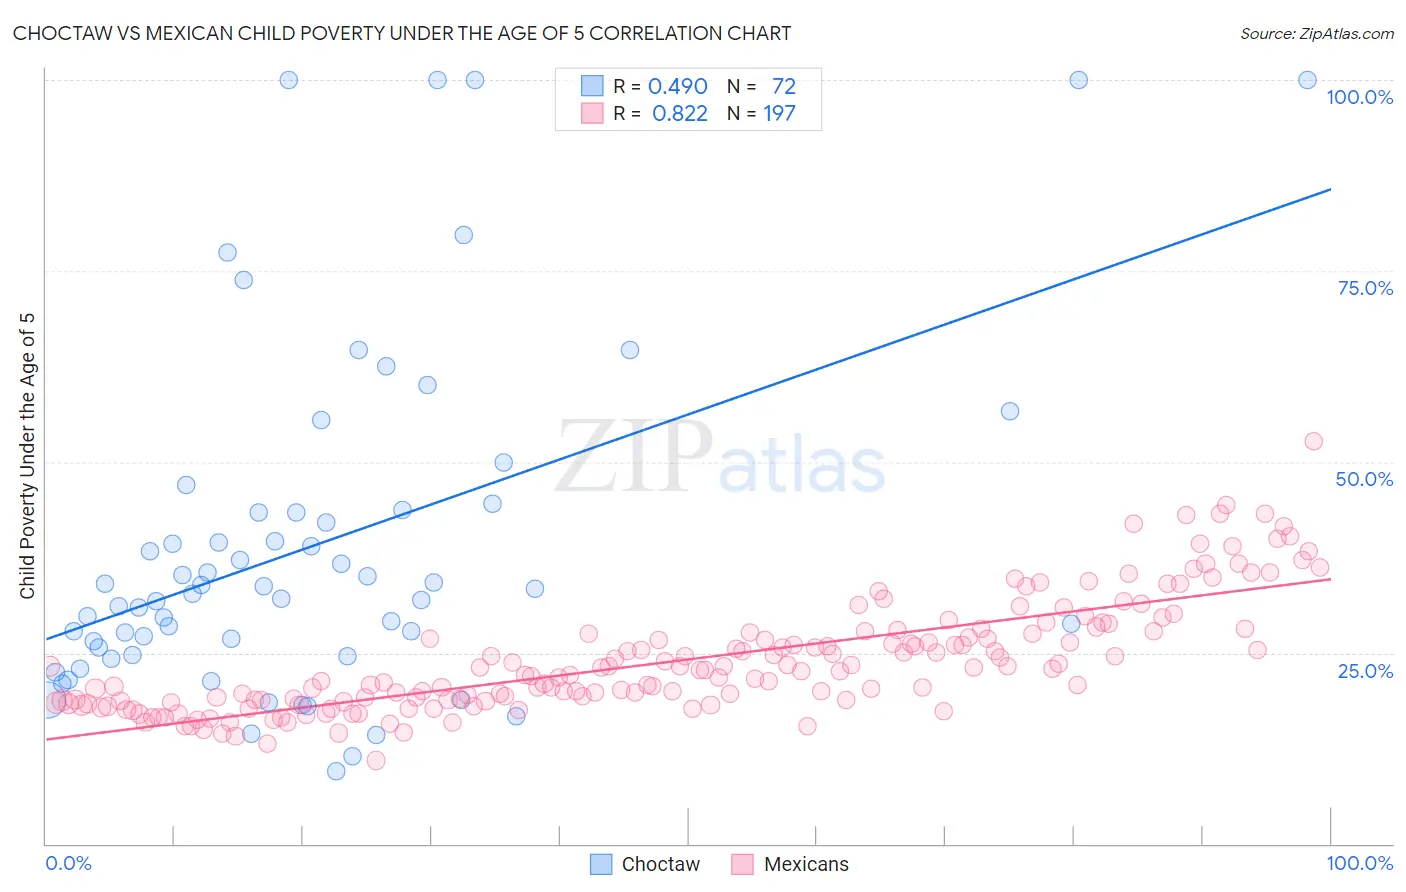 Choctaw vs Mexican Child Poverty Under the Age of 5